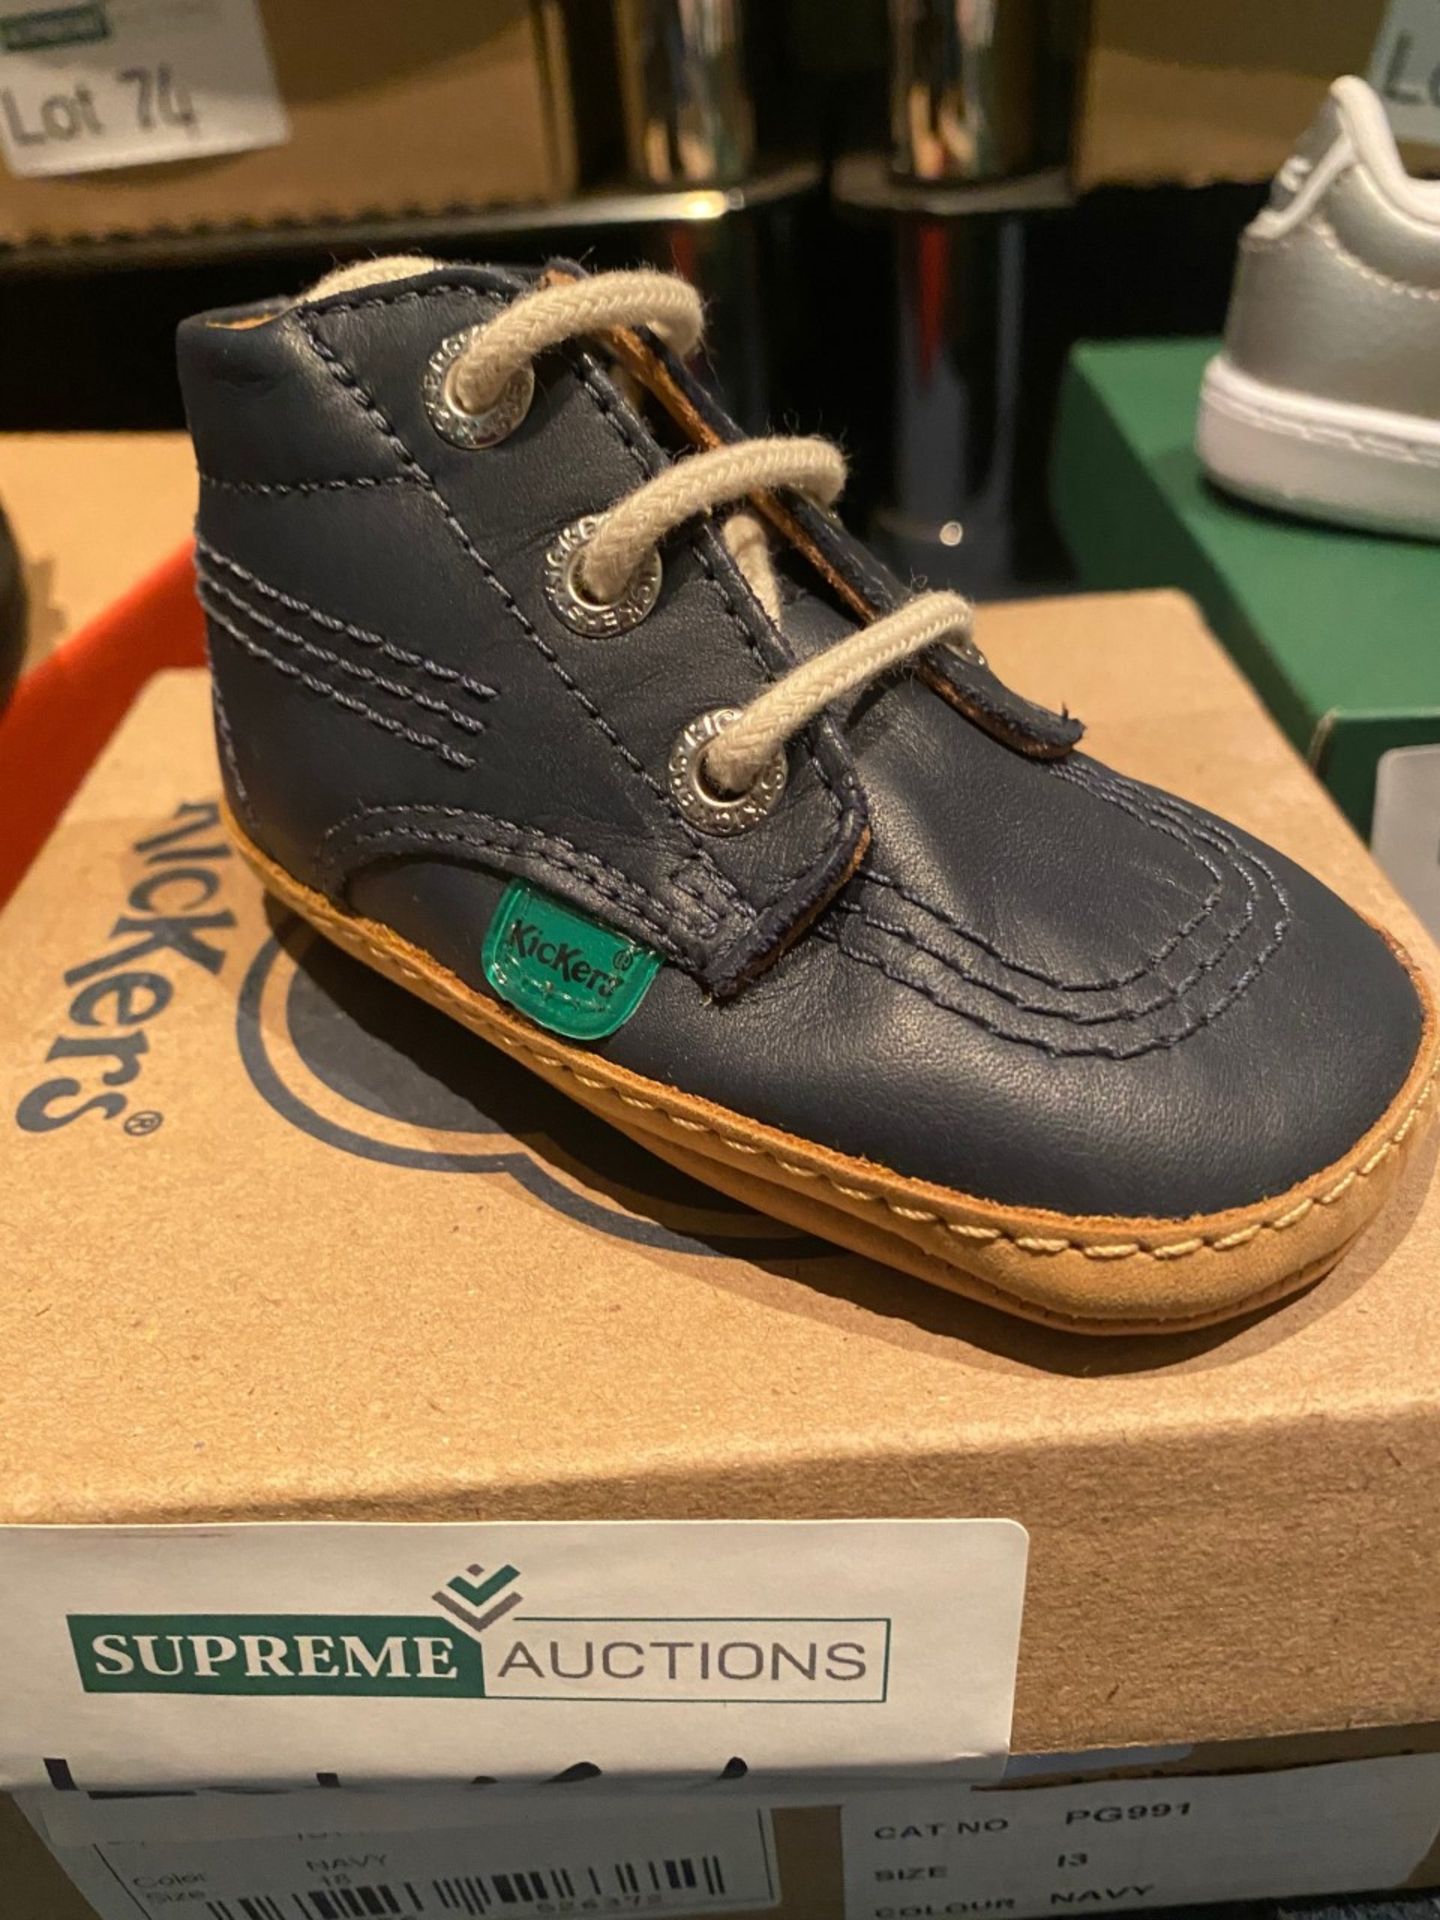 NEW & BOXED KICKERS NAVY LEATHER SHOE SIZE INFANT 3 (161/21) - Image 2 of 2